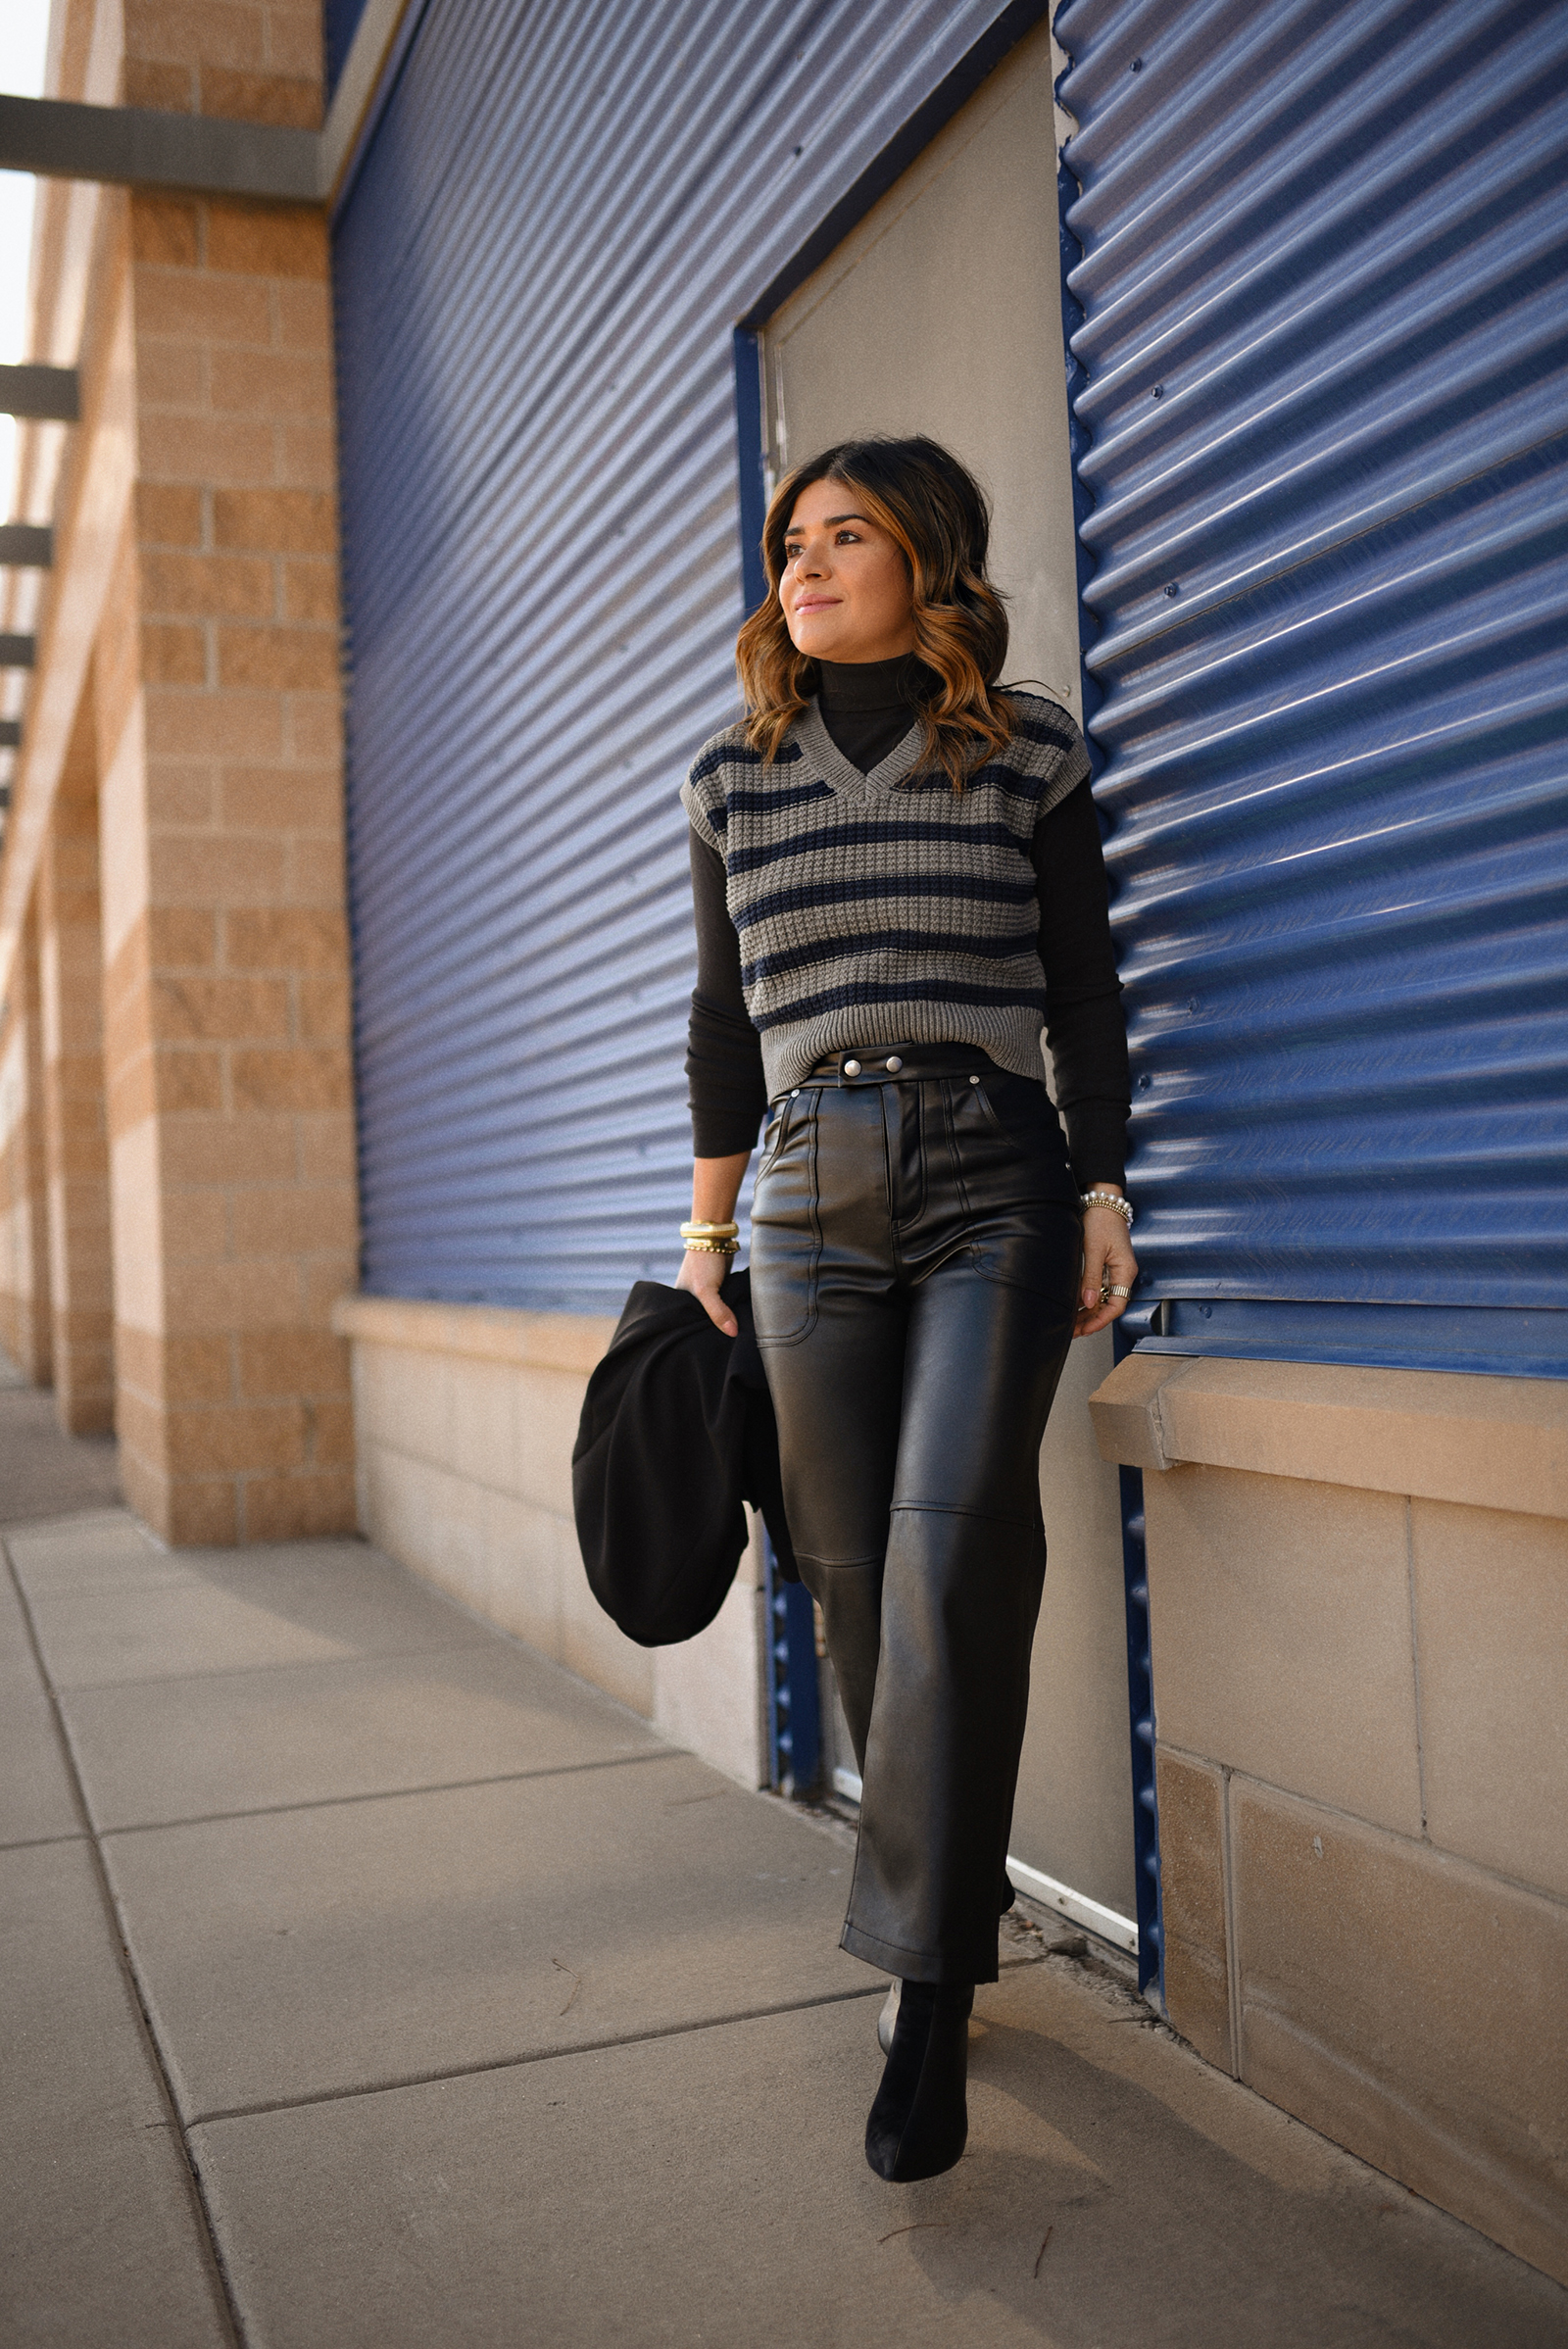 Carolina Hellal of Chic Talk wearing a faux leather pants from BLANKNYC via SHOPBOP, a Madewell knitted vest, a black blazer, a Strathberry leather tote and black booties